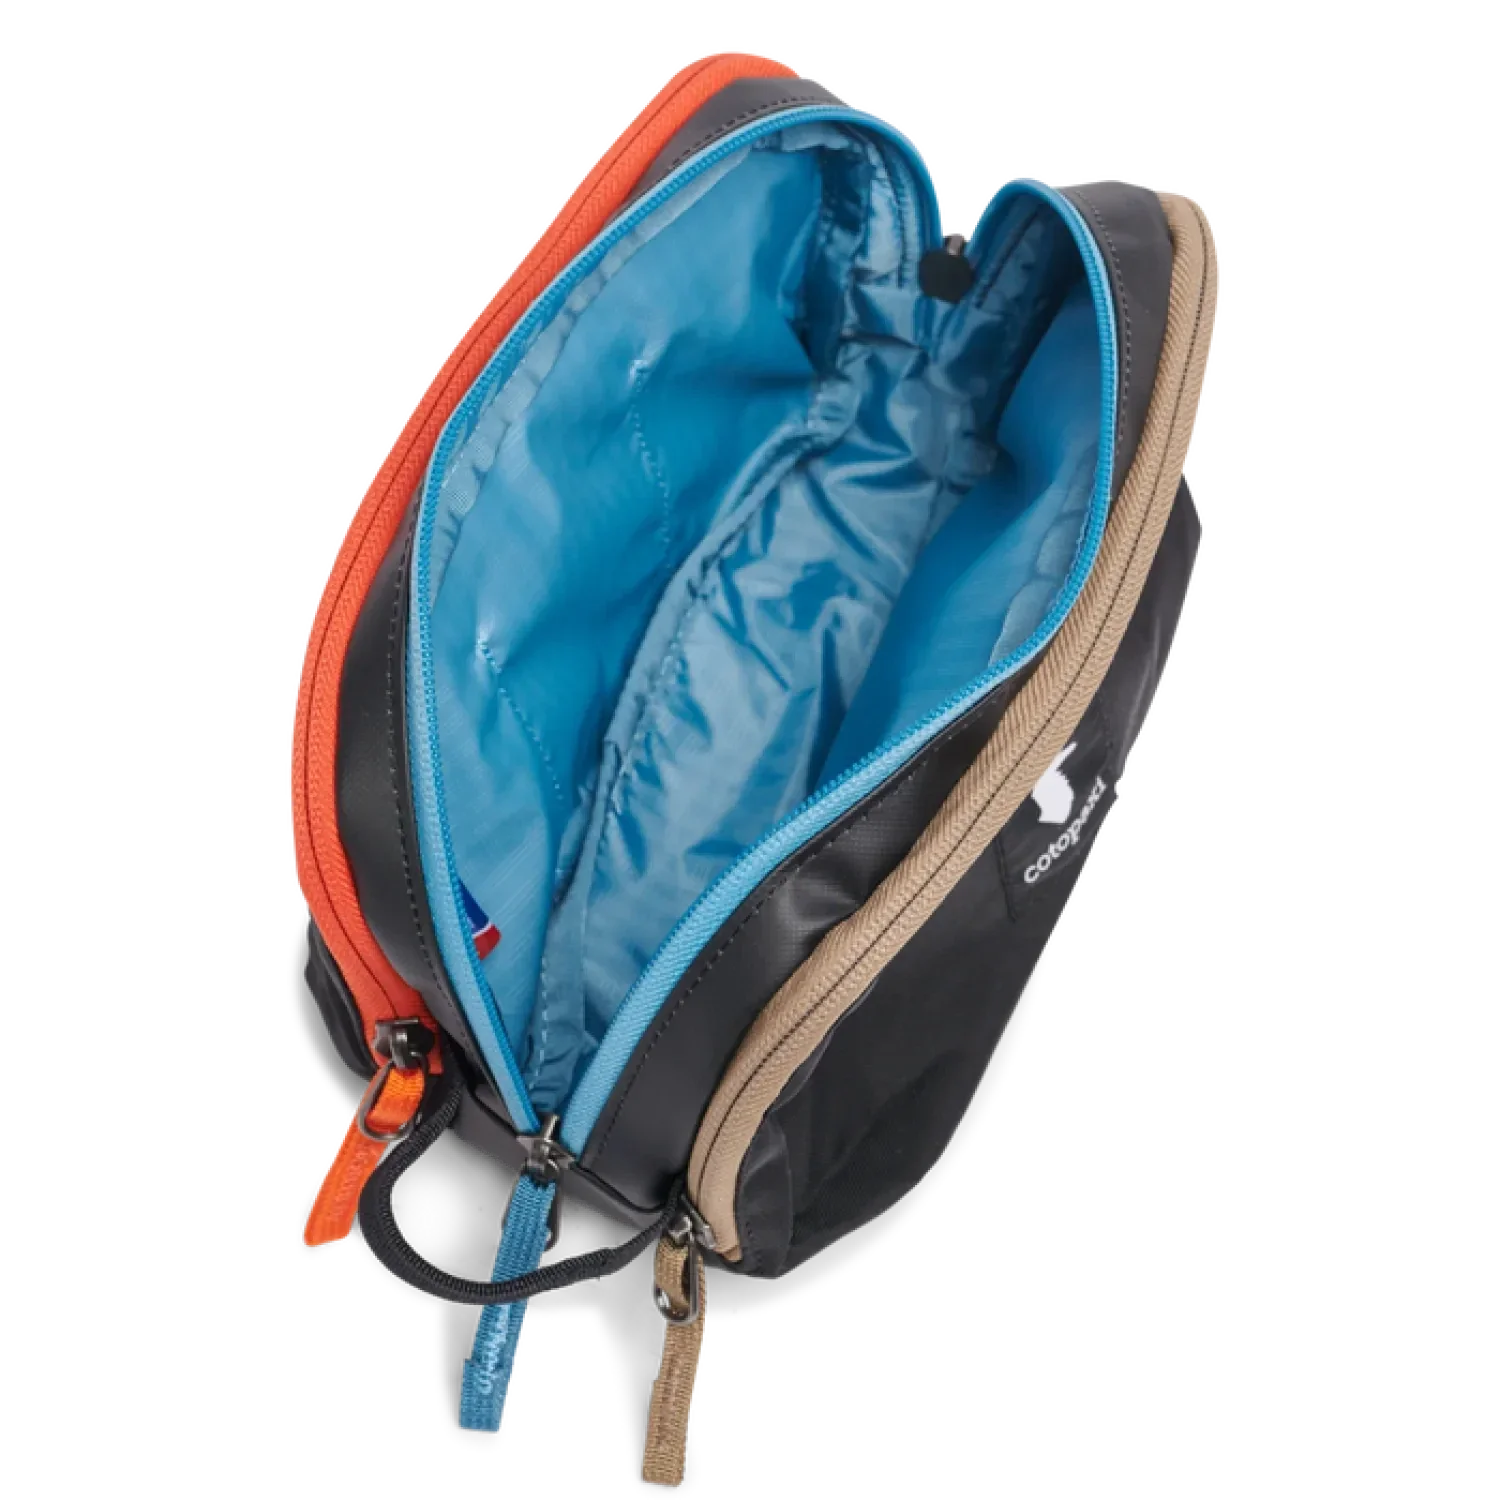 Cotopaxi PACKS|LUGGAGE - PACK|CASUAL - WAIST|SLING|MESSENGER|PURSE Nido Accessory Bag DEL DIA